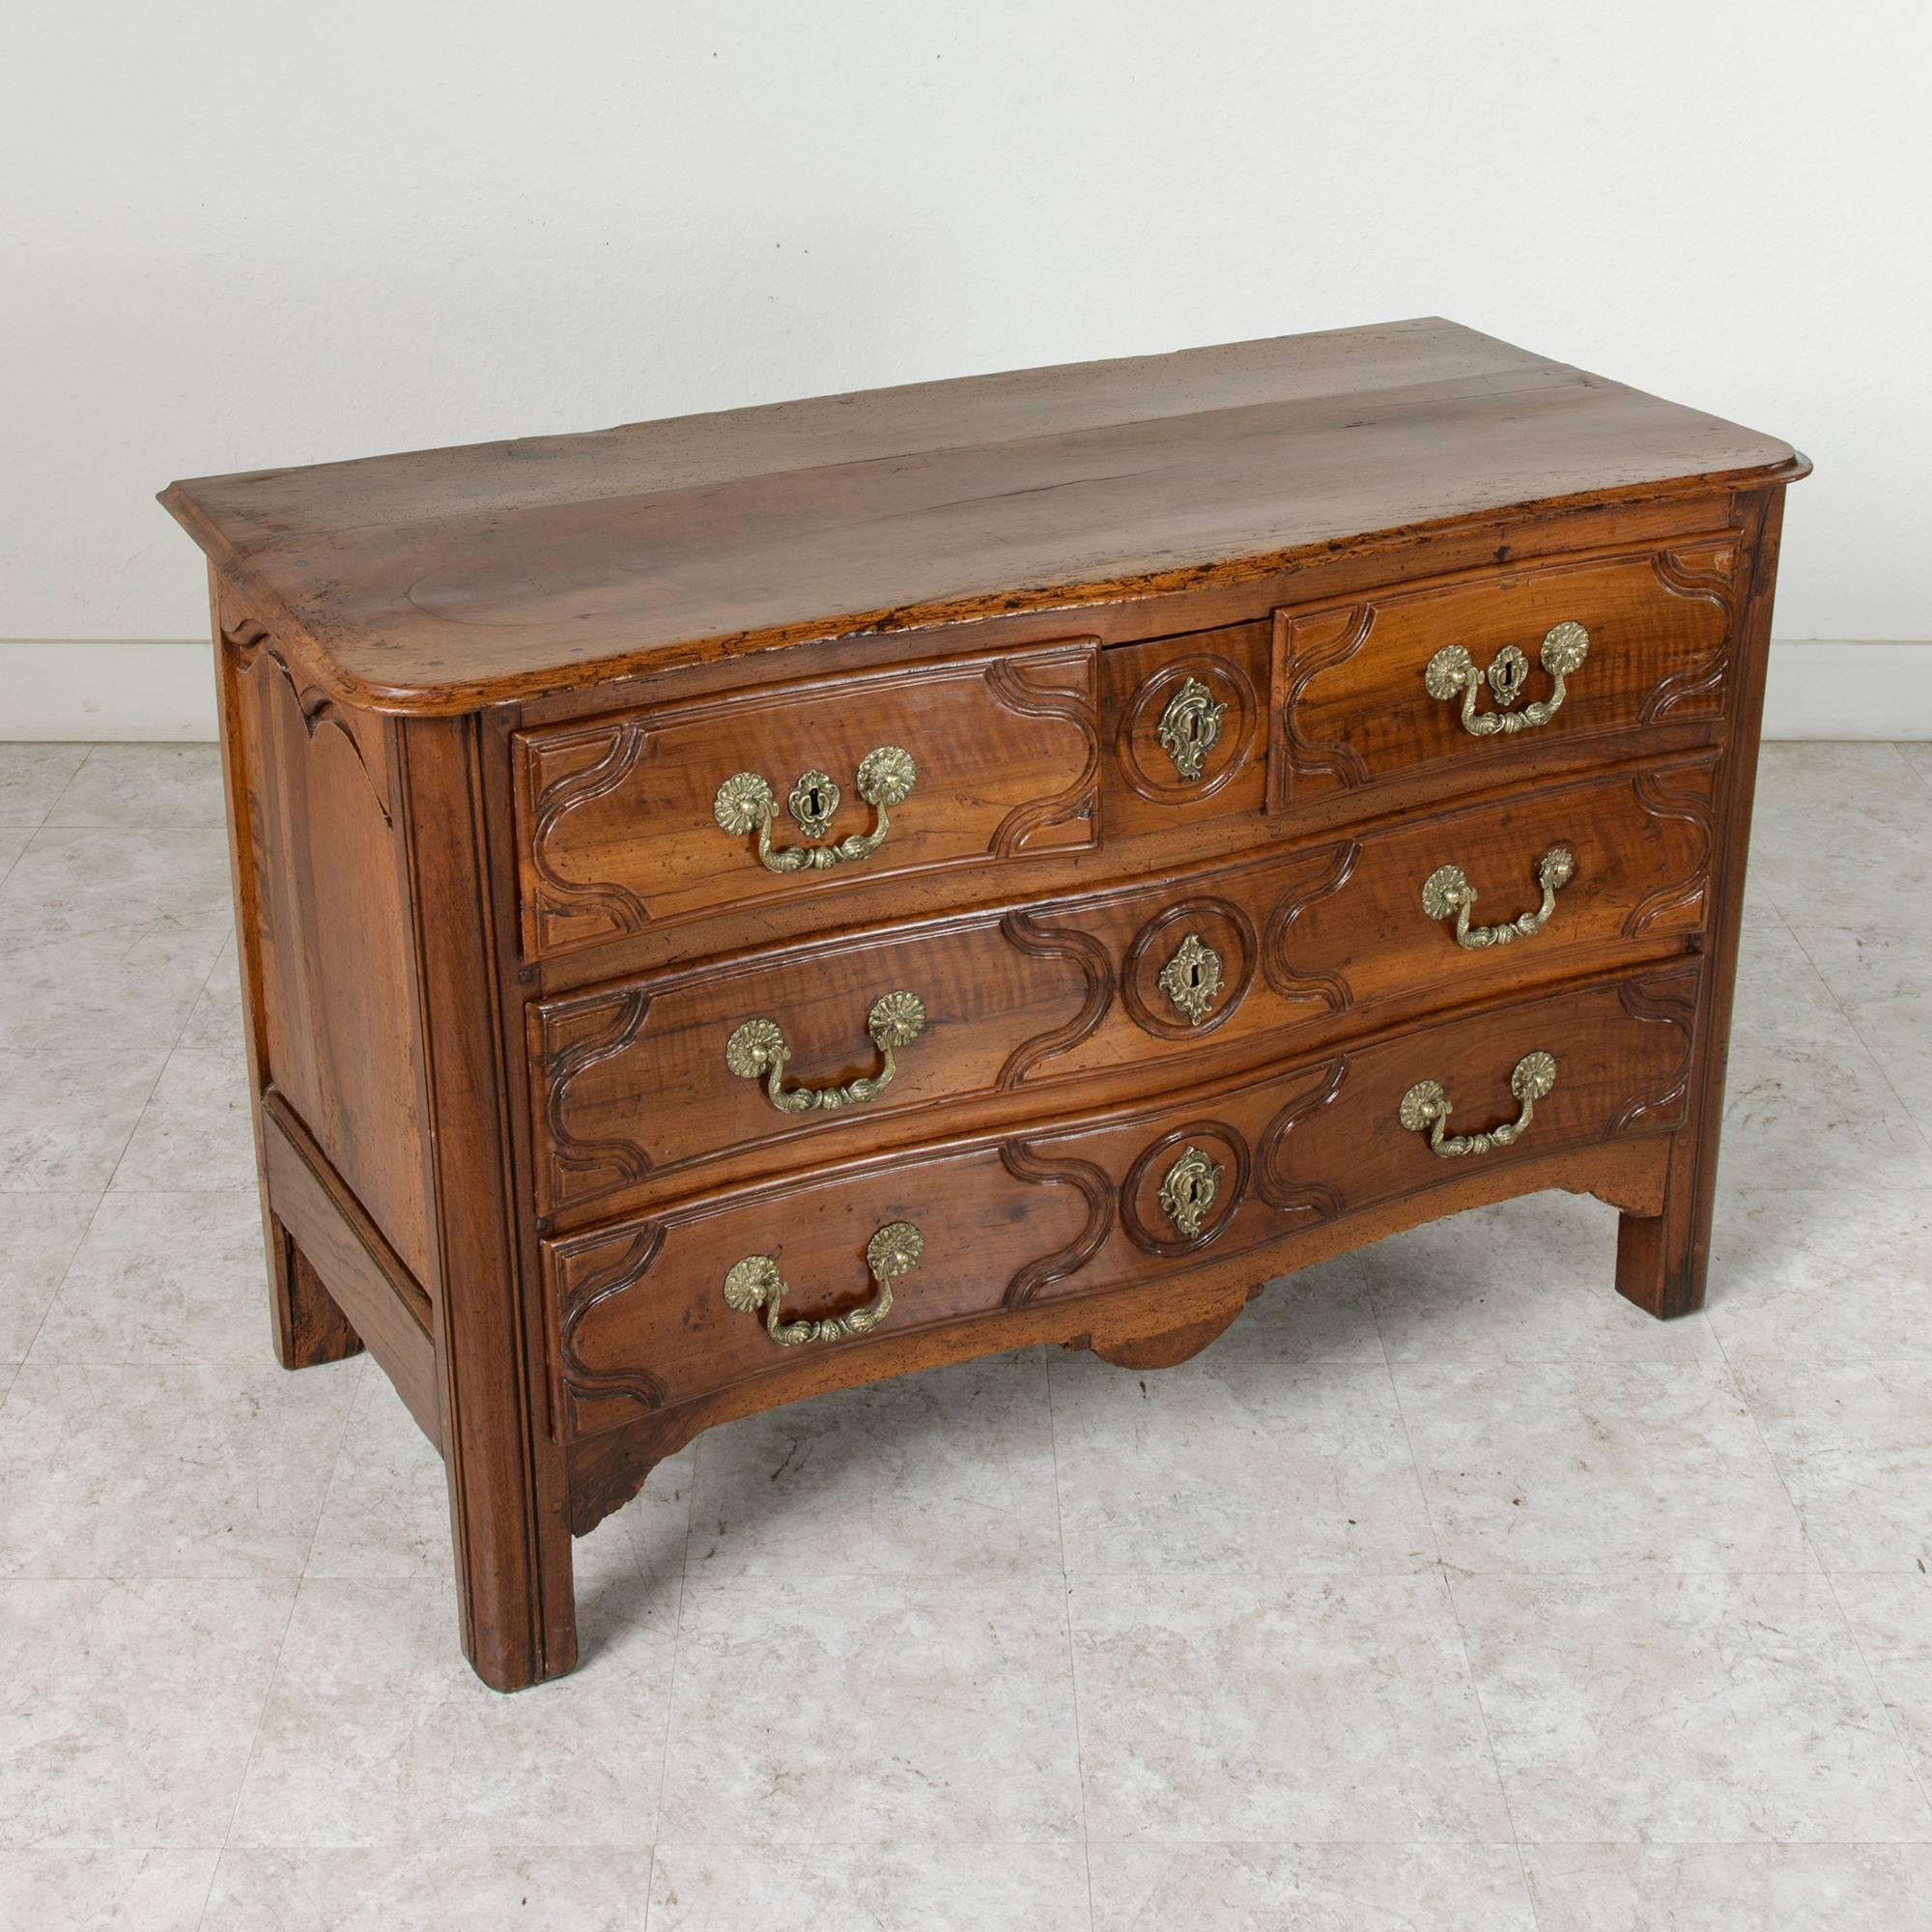 A magnificent French antique hand-carved walnut chest of drawers stamped by the cabinet maker, Jean-Baptiste Fromageau (b. 1726). Fromageau became a master ebenist in 1755 and later established his atelier on the famous Rue du Faubourg Saint-Antoine